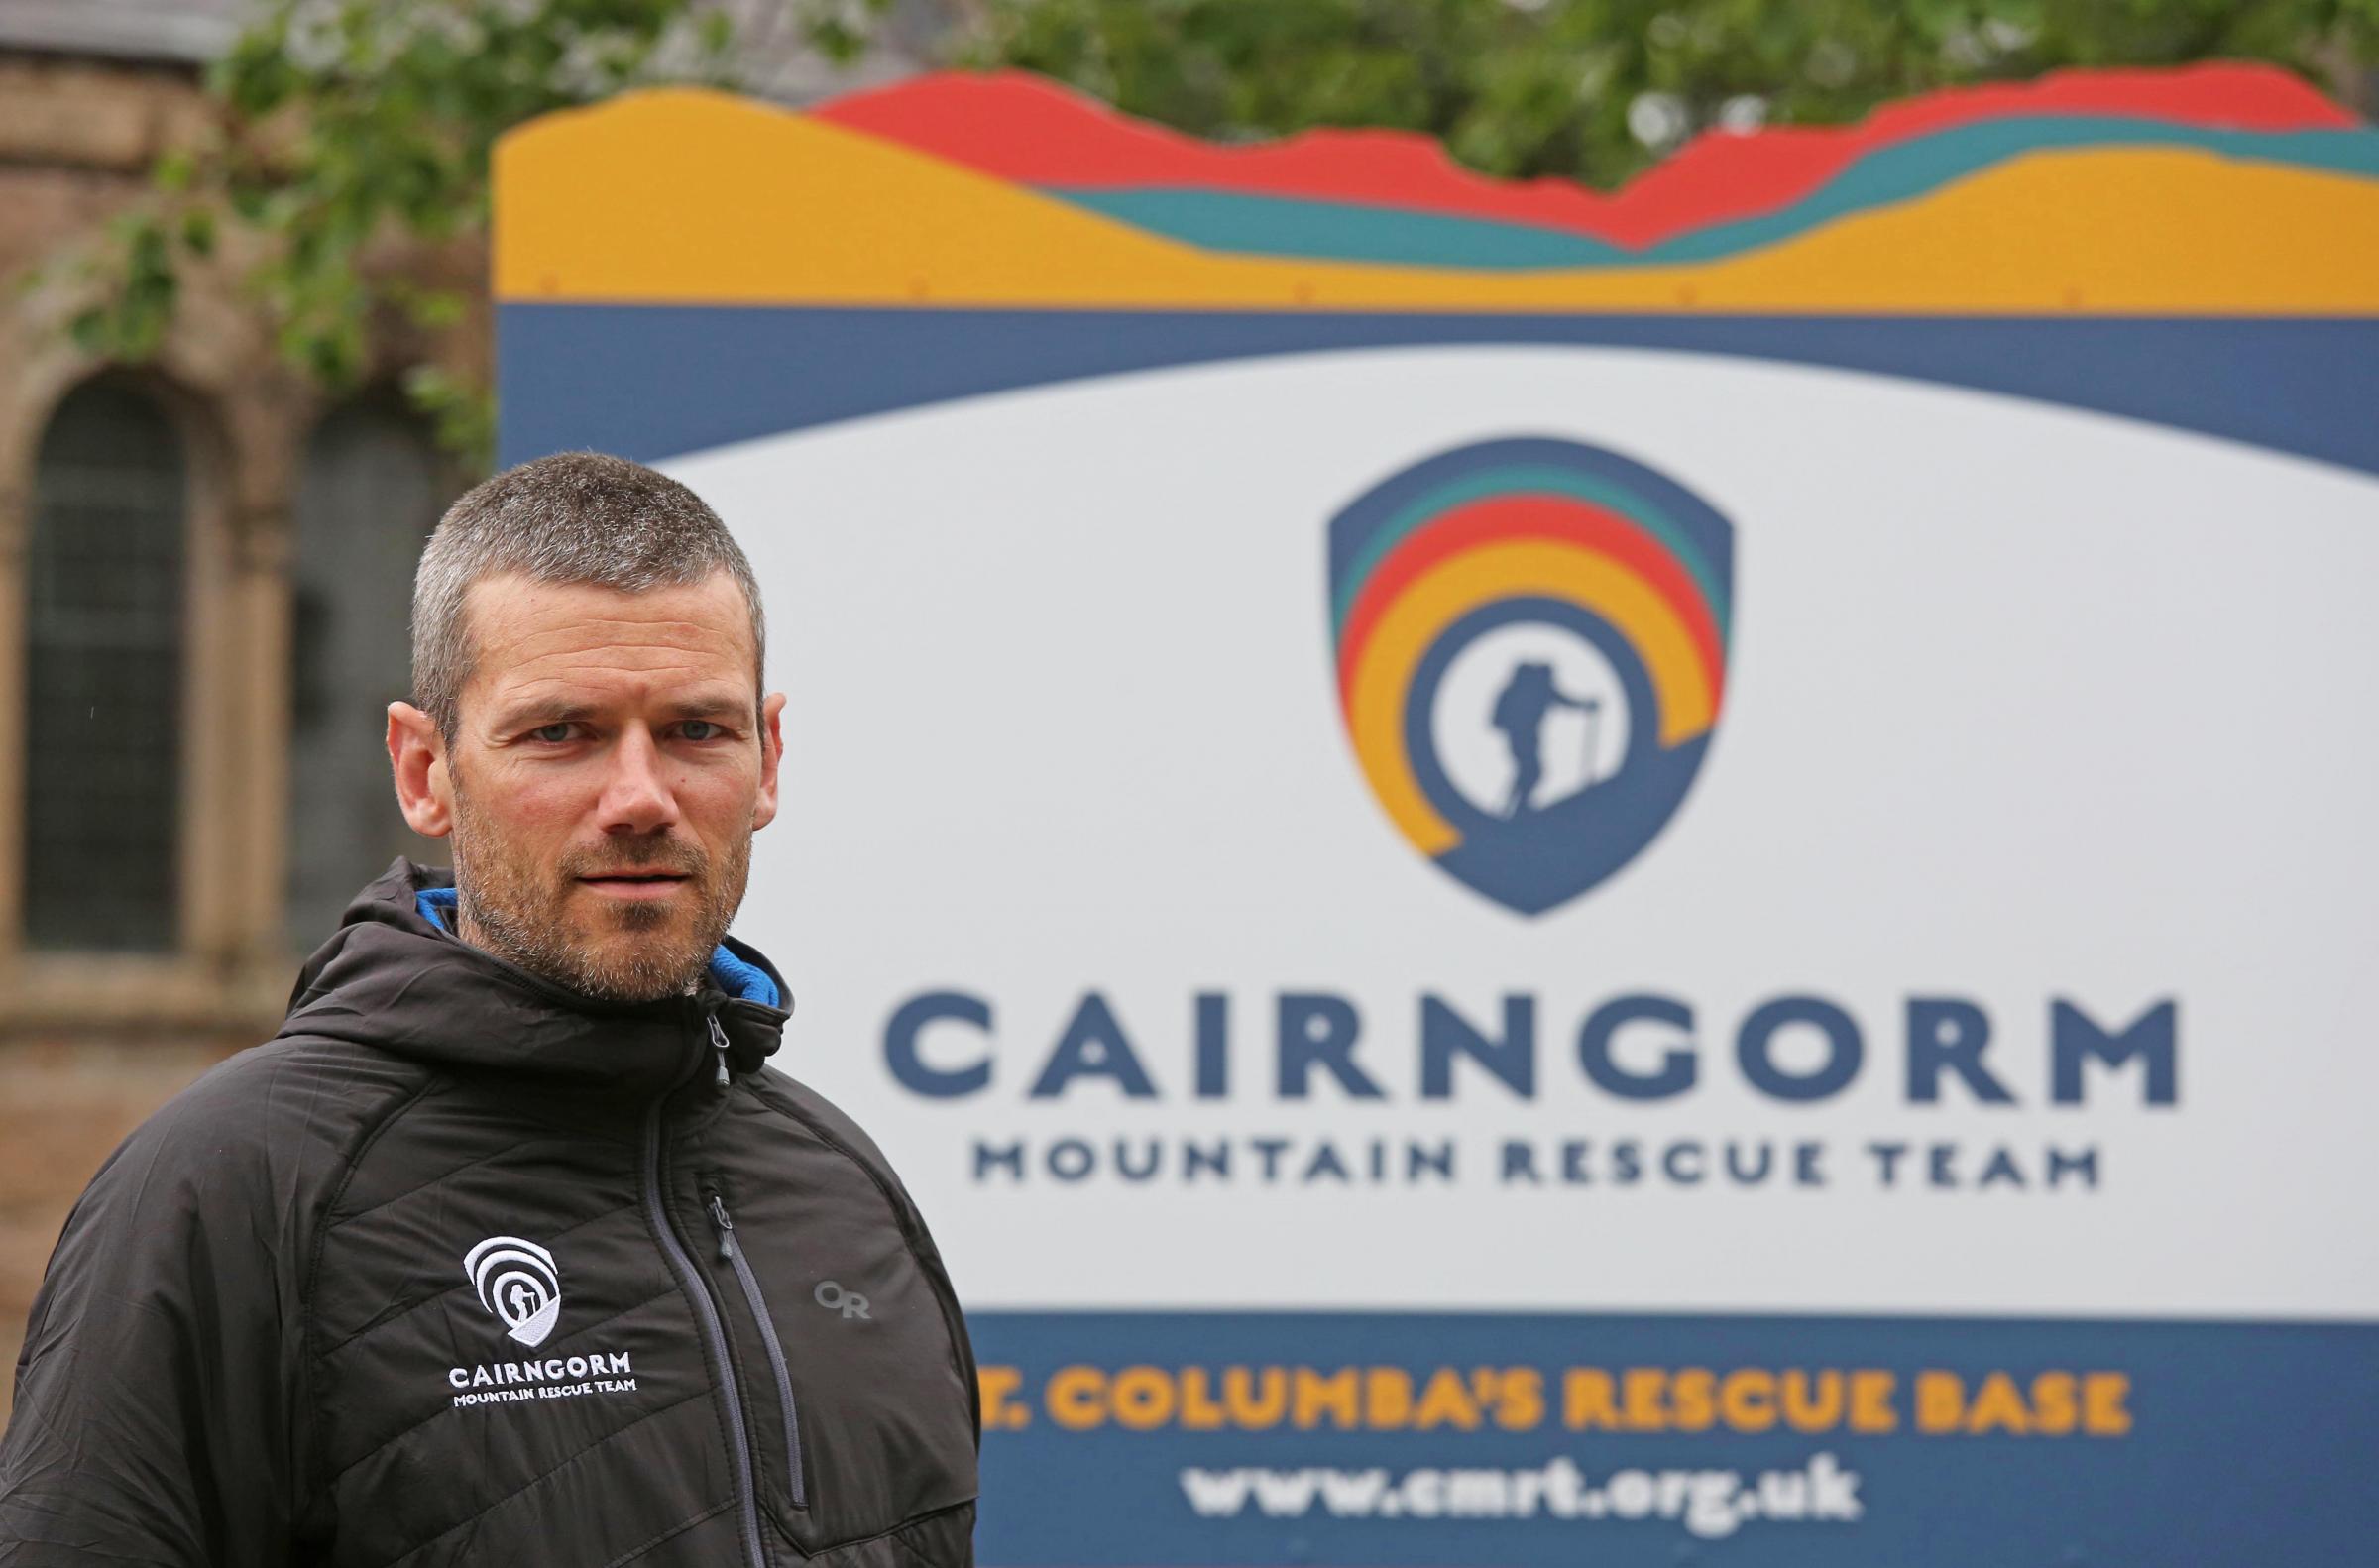 Iain Cornfoot, who is the Cairngorm Mountain Rescue team leader. Photo credit: Peter Jolly.